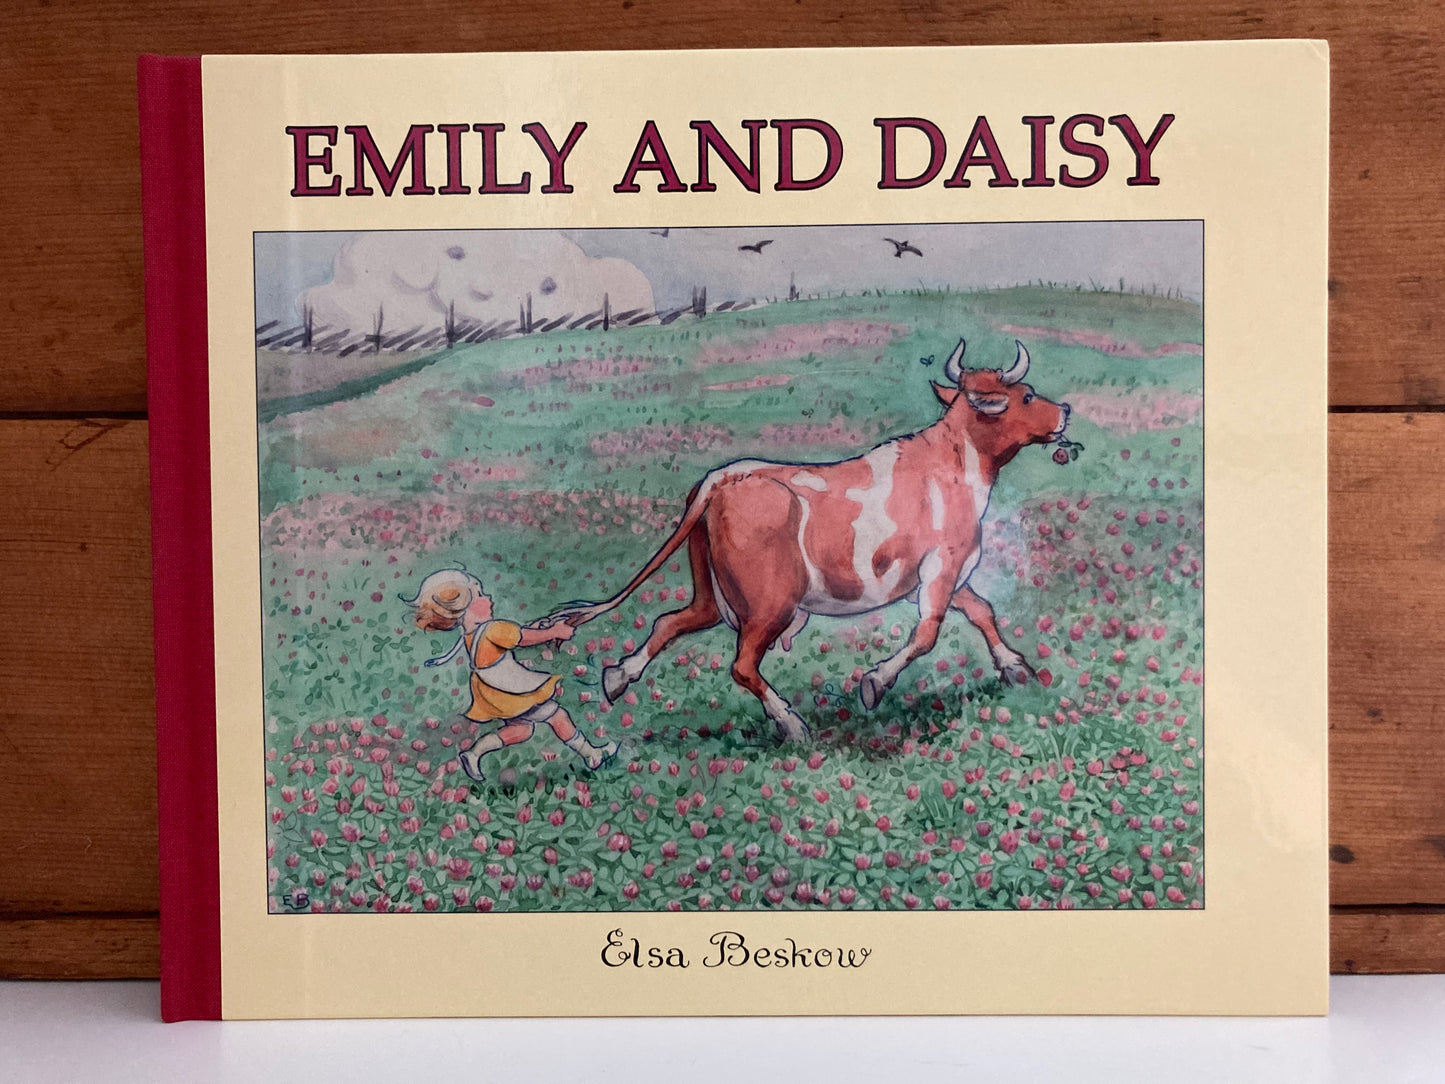 Children's Picture Book - EMILY AND DAISY